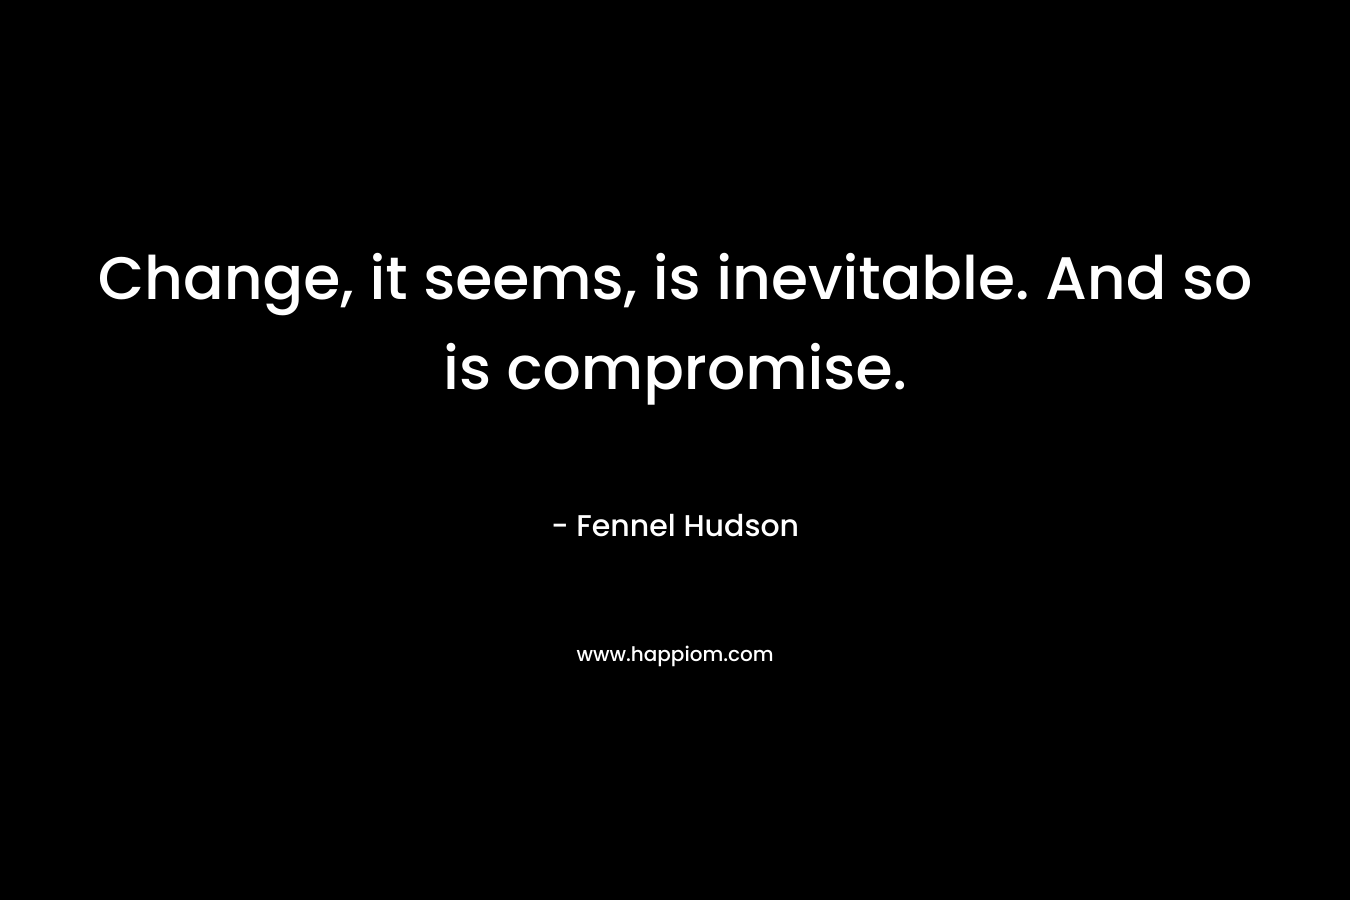 Change, it seems, is inevitable. And so is compromise.